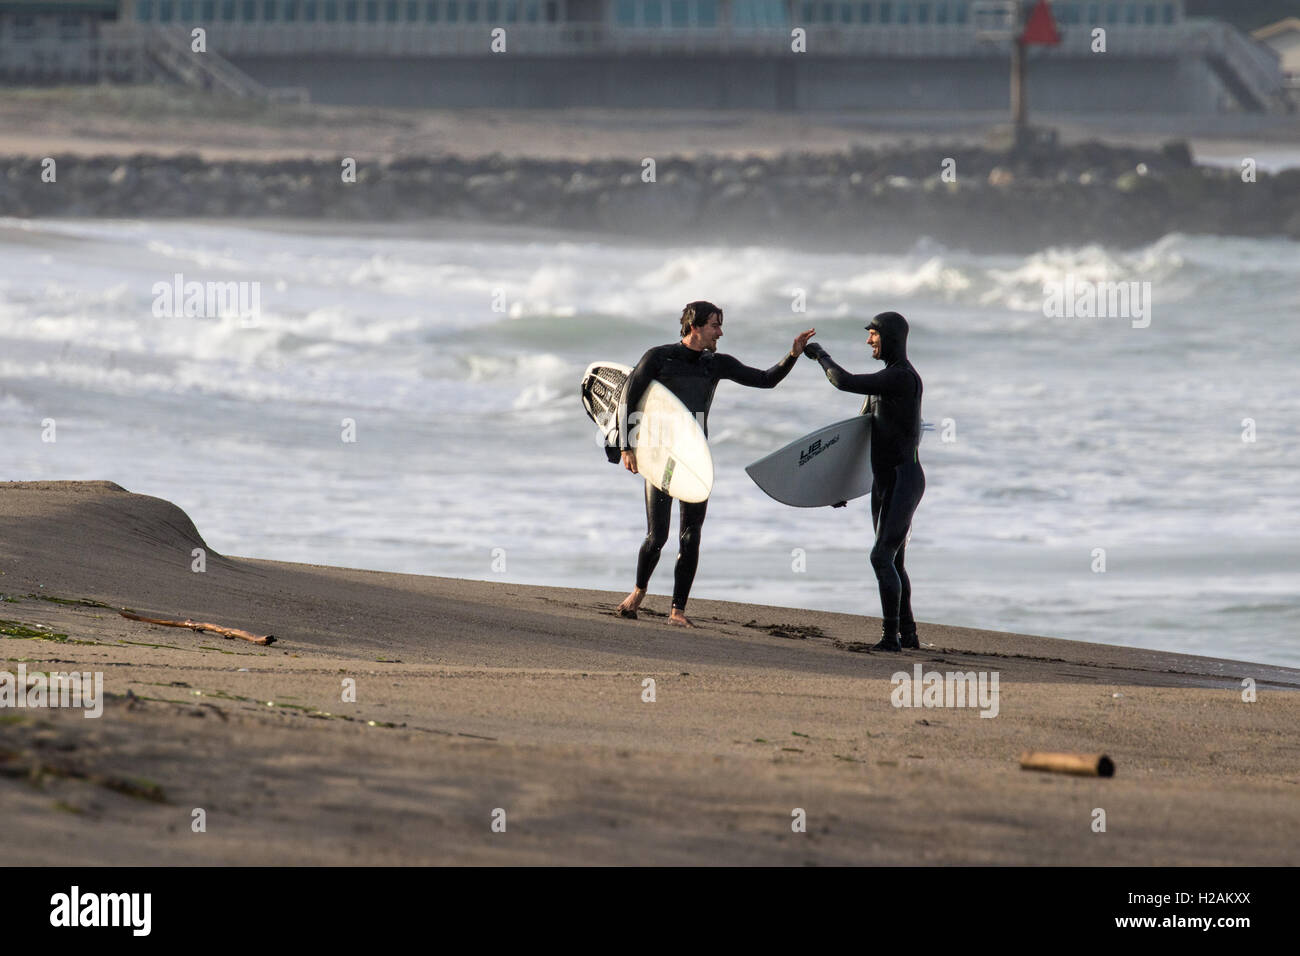 Two surfers congratulate each other after their successful rides in the Pacific Ocean of northern California near Moss Landing. Stock Photo